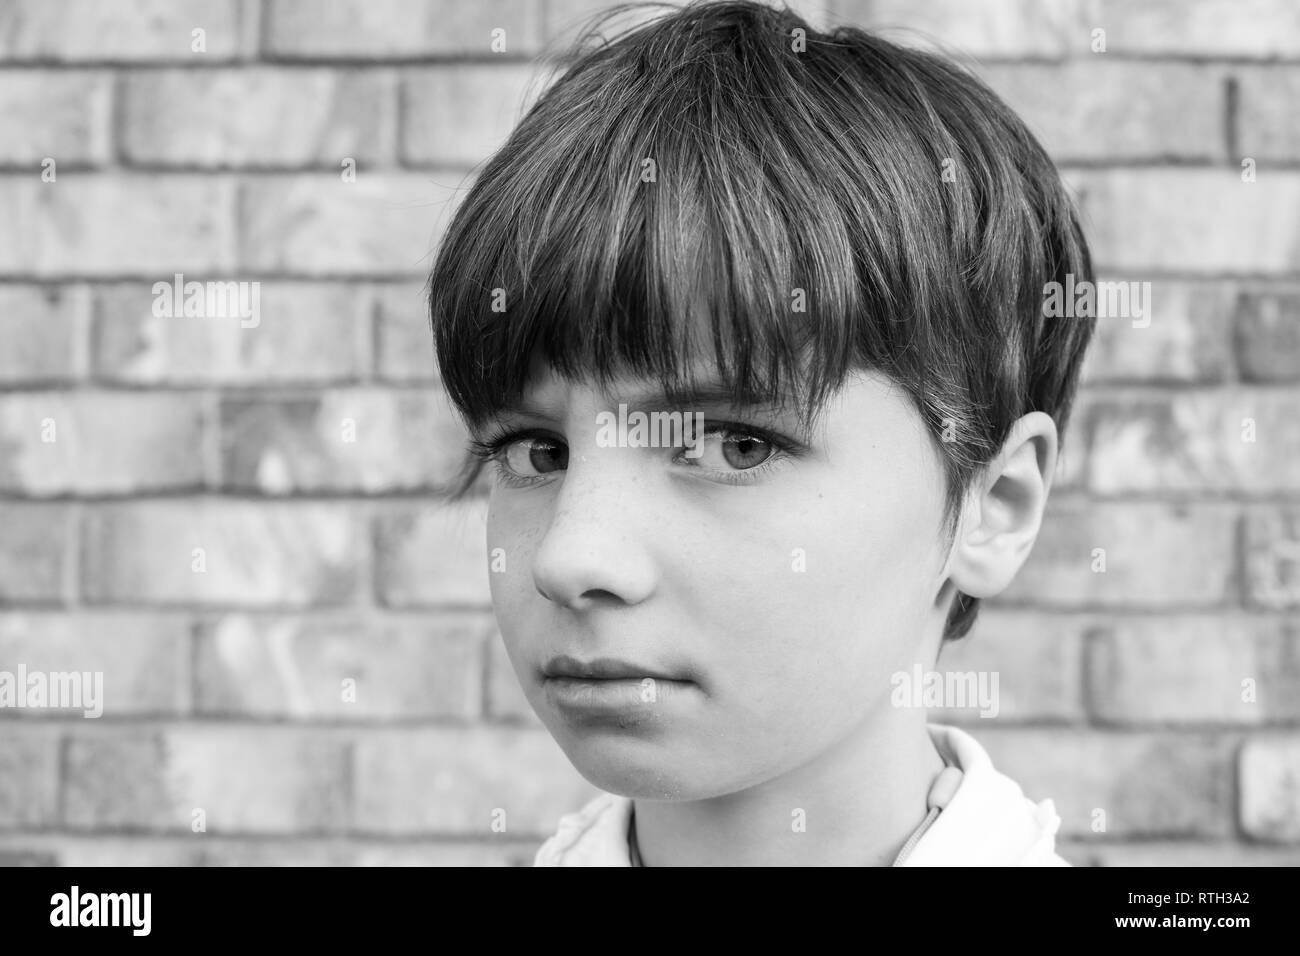 Black and white portrait of a short haired child with big eyes and an angry stare Stock Photo